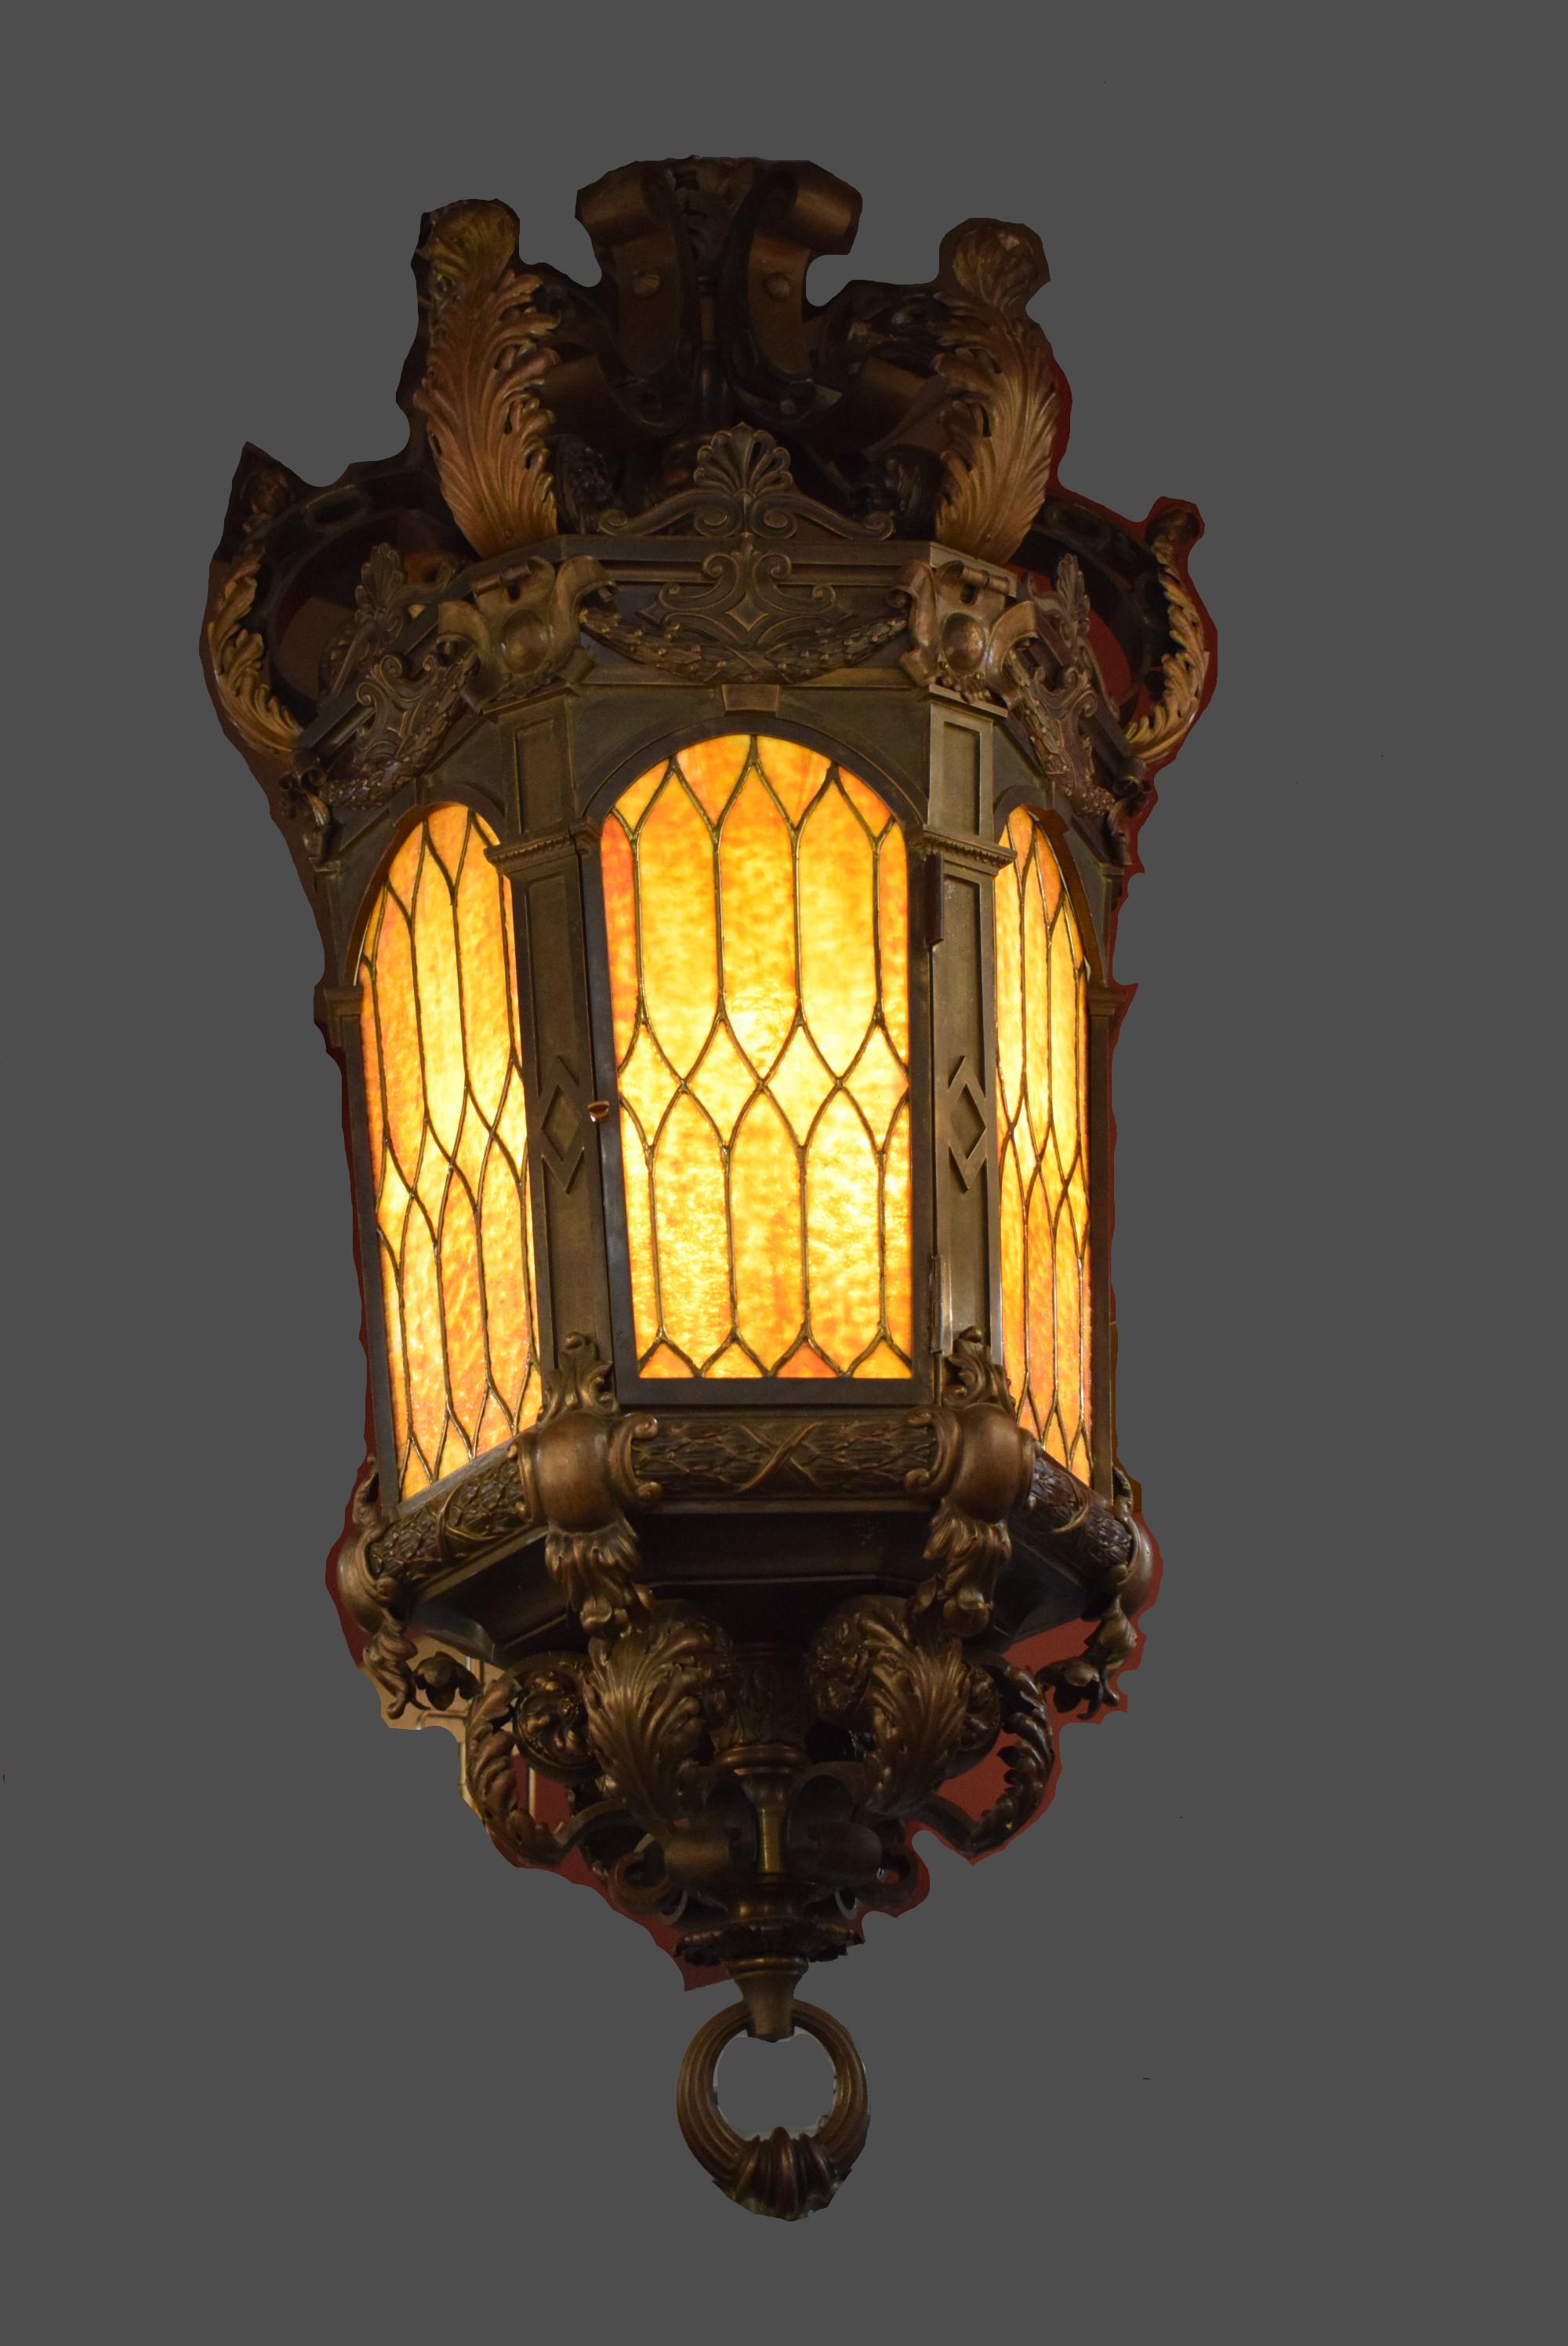 An exquisite bronze lantern with stained glass panels. The bronze work is of the highest quality. France, circa 1910
Dimensions: Height 72